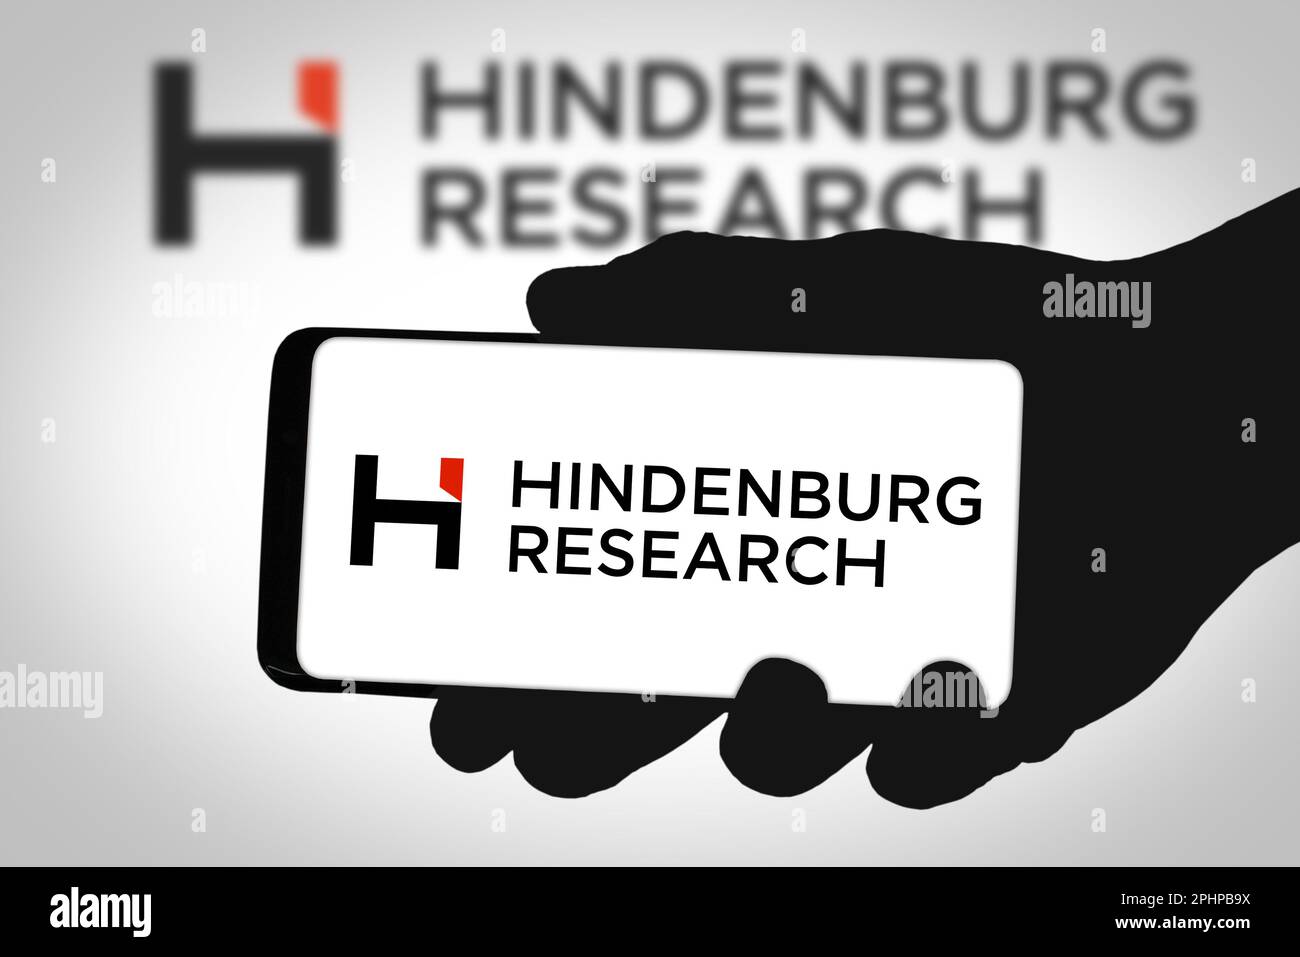 Hindenburg Research smartphone application Stock Photo